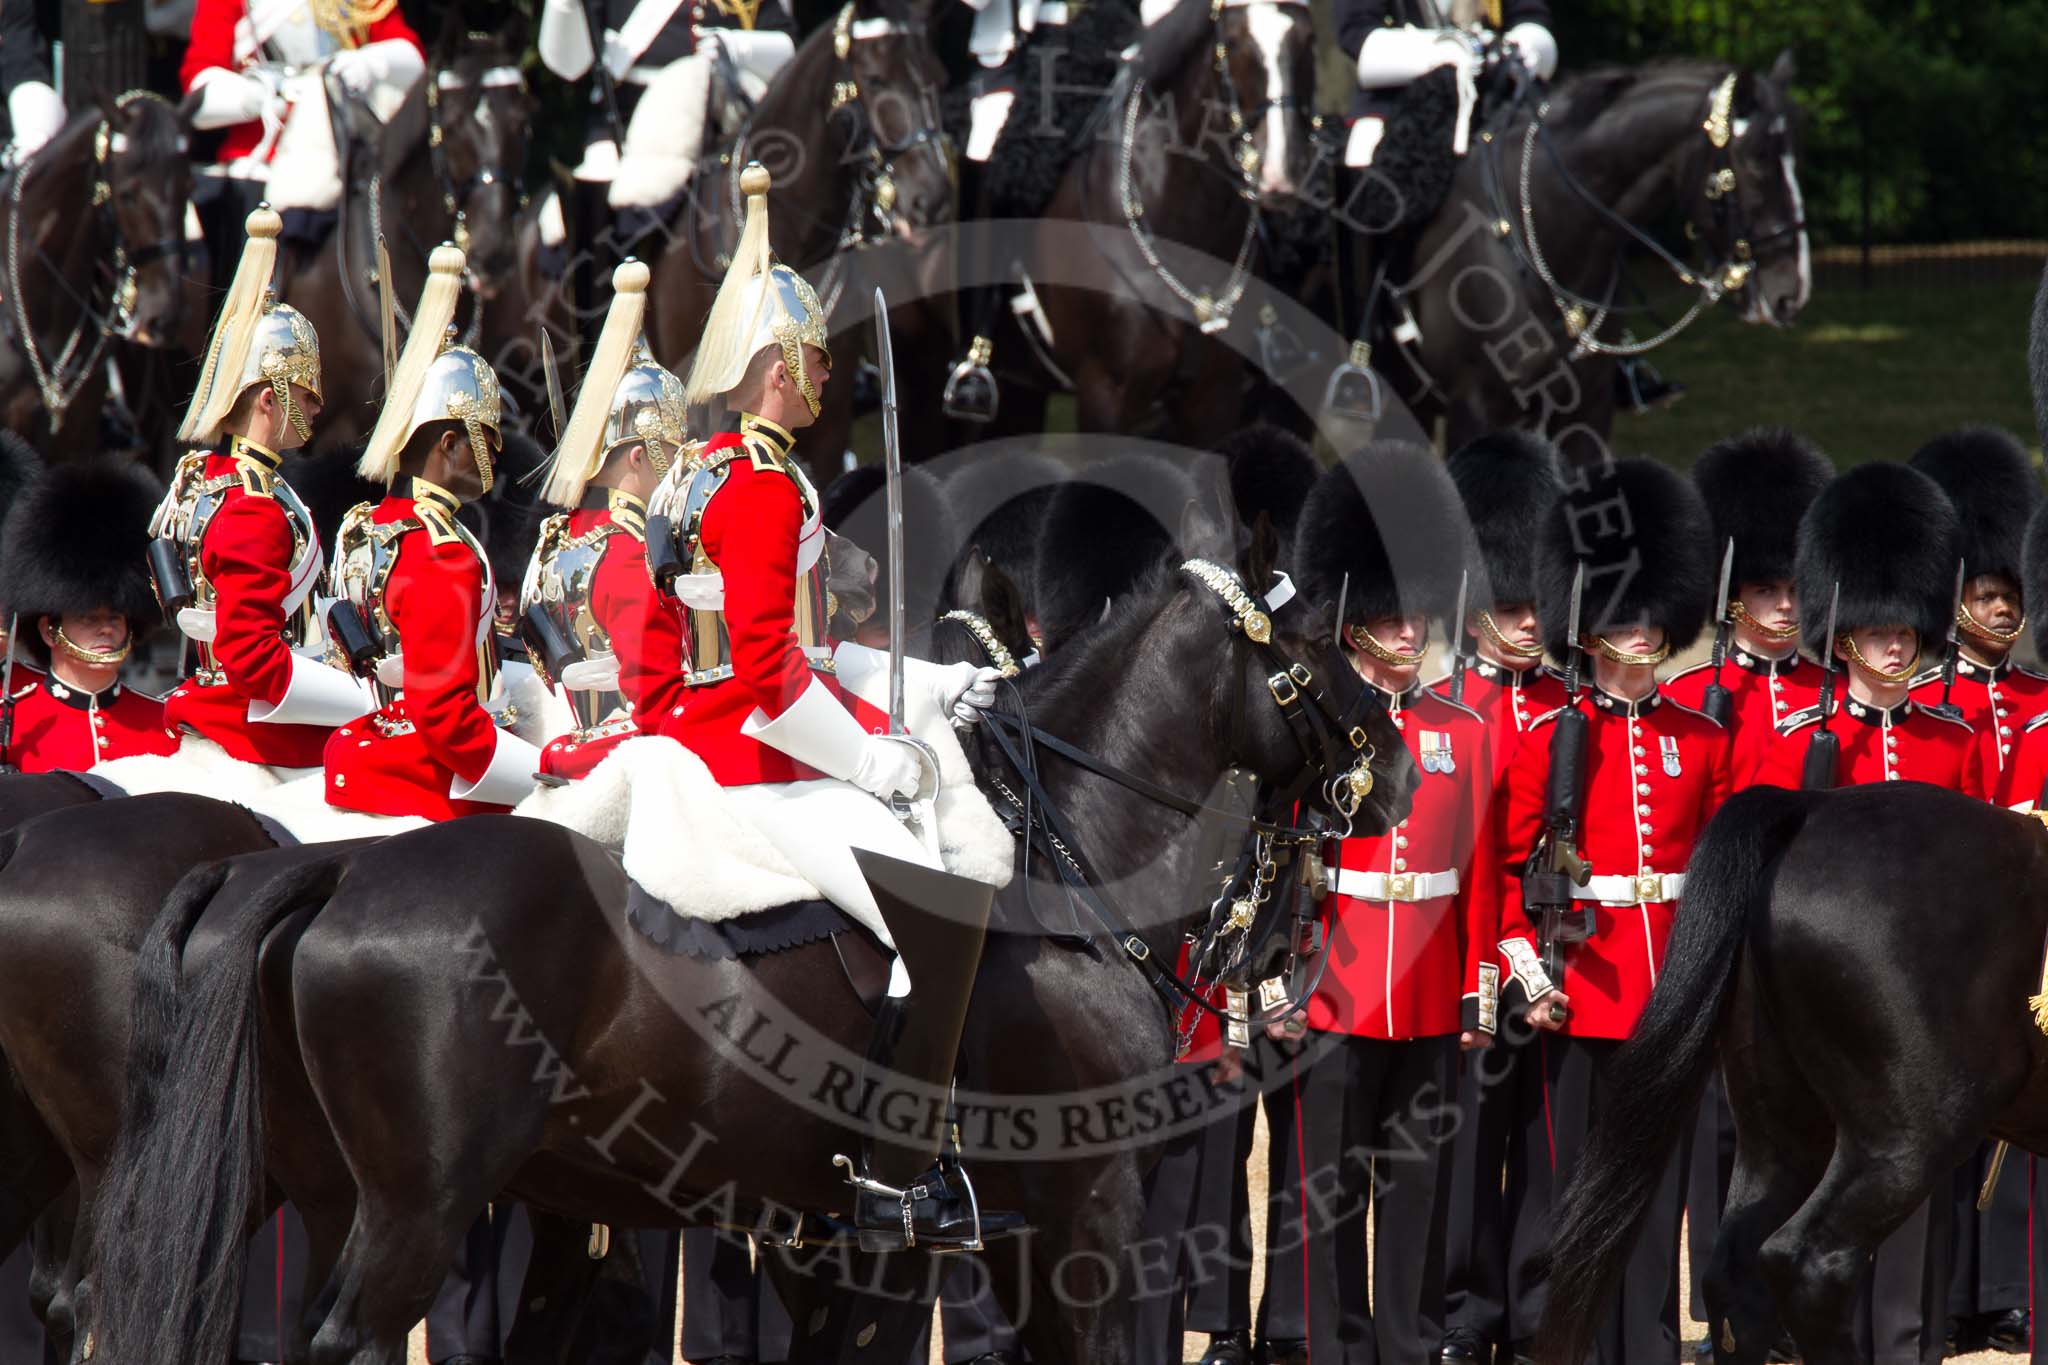 The Colonel's Review 2011: The four Troopers of The Life Guards at the head of the Royal Procession passing No. 4 Guard, Nijmegen Company Grenadier Guards, during the Inspection of the Line..
Horse Guards Parade, Westminster,
London SW1,

United Kingdom,
on 04 June 2011 at 11:02, image #92